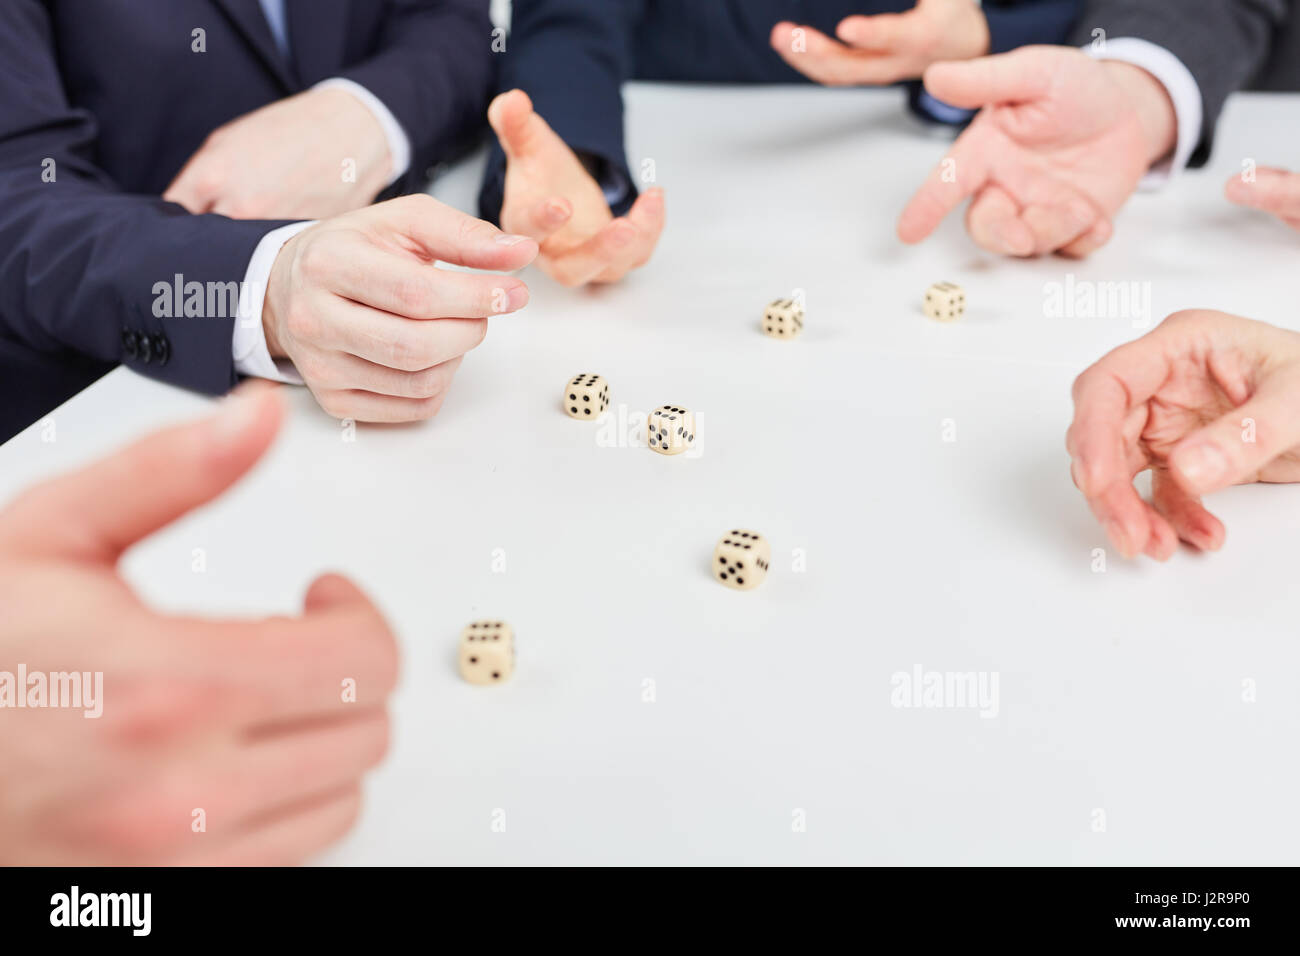 Hands playing roll the dice game as business team building exercise Stock Photo